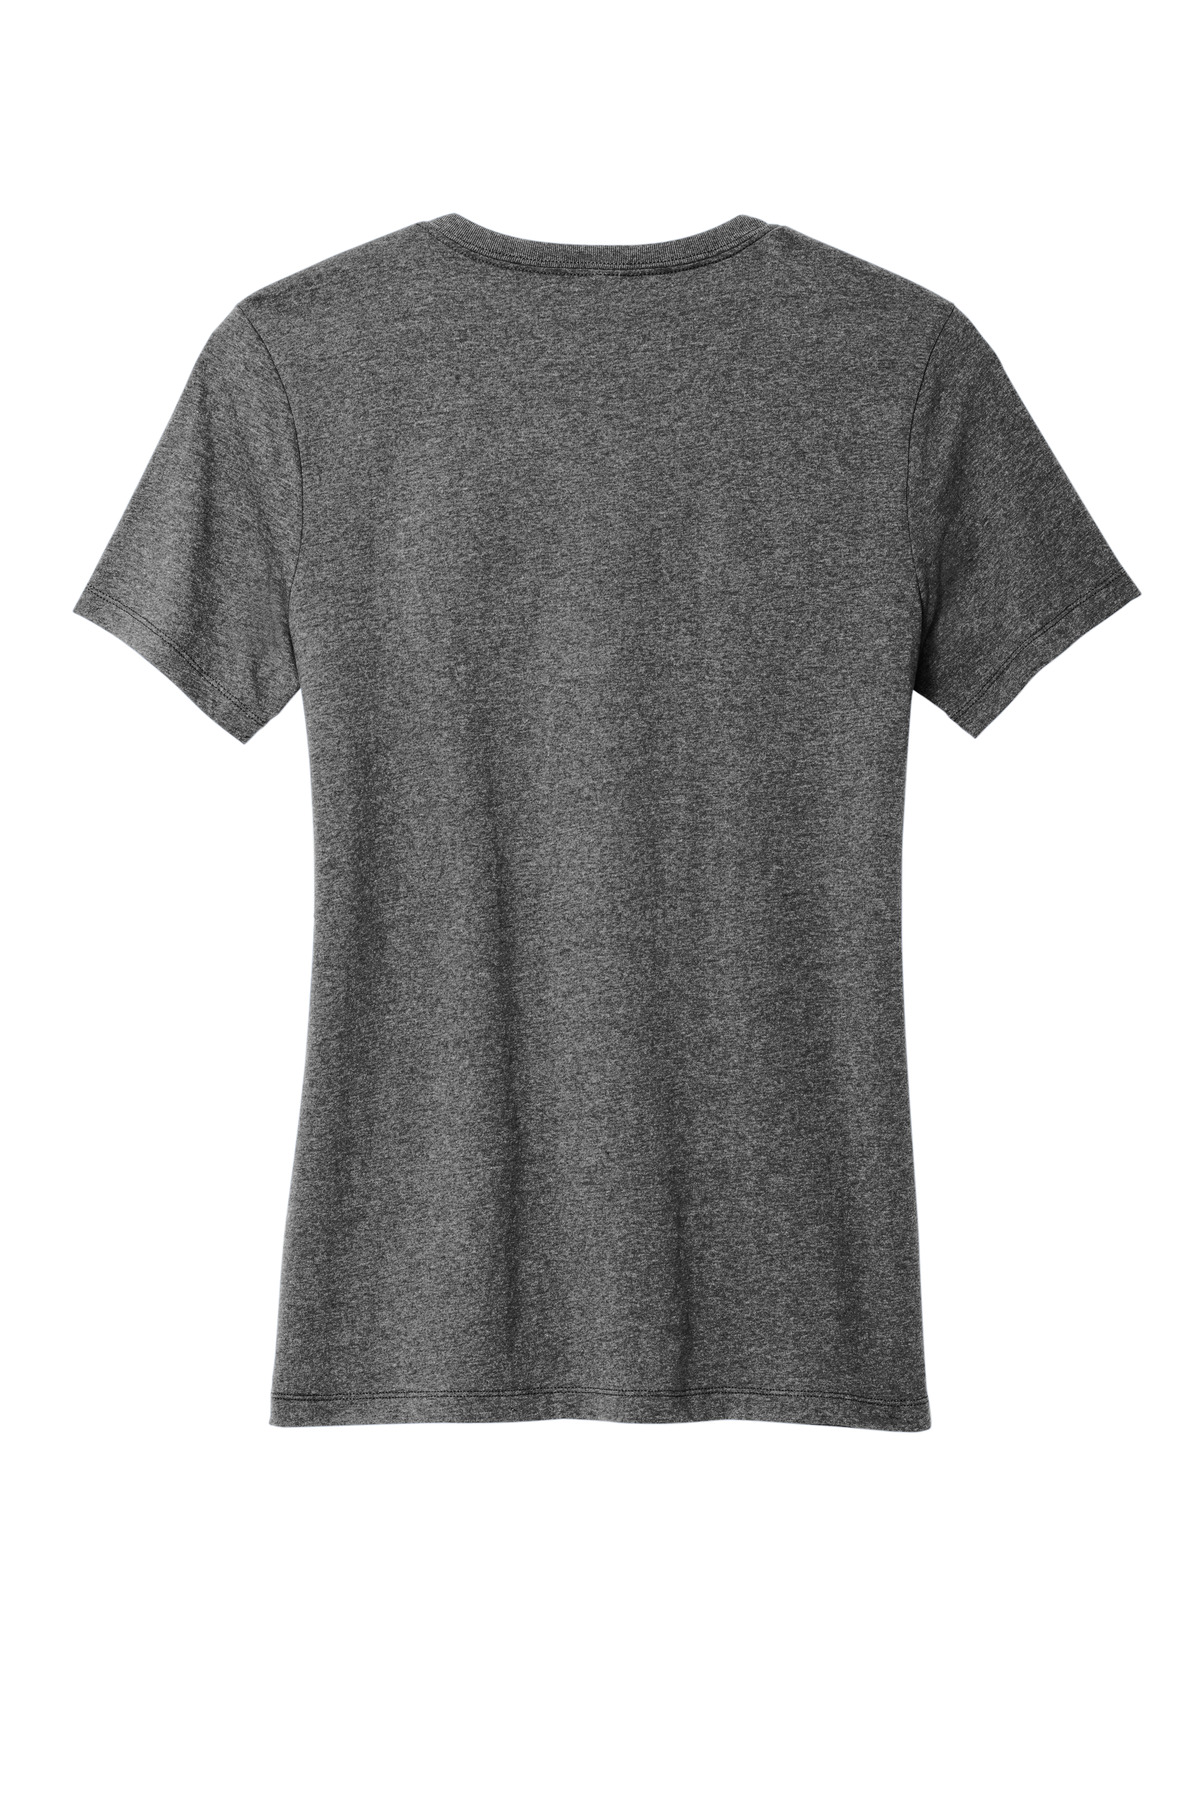 Reloaded Charcoal Heather